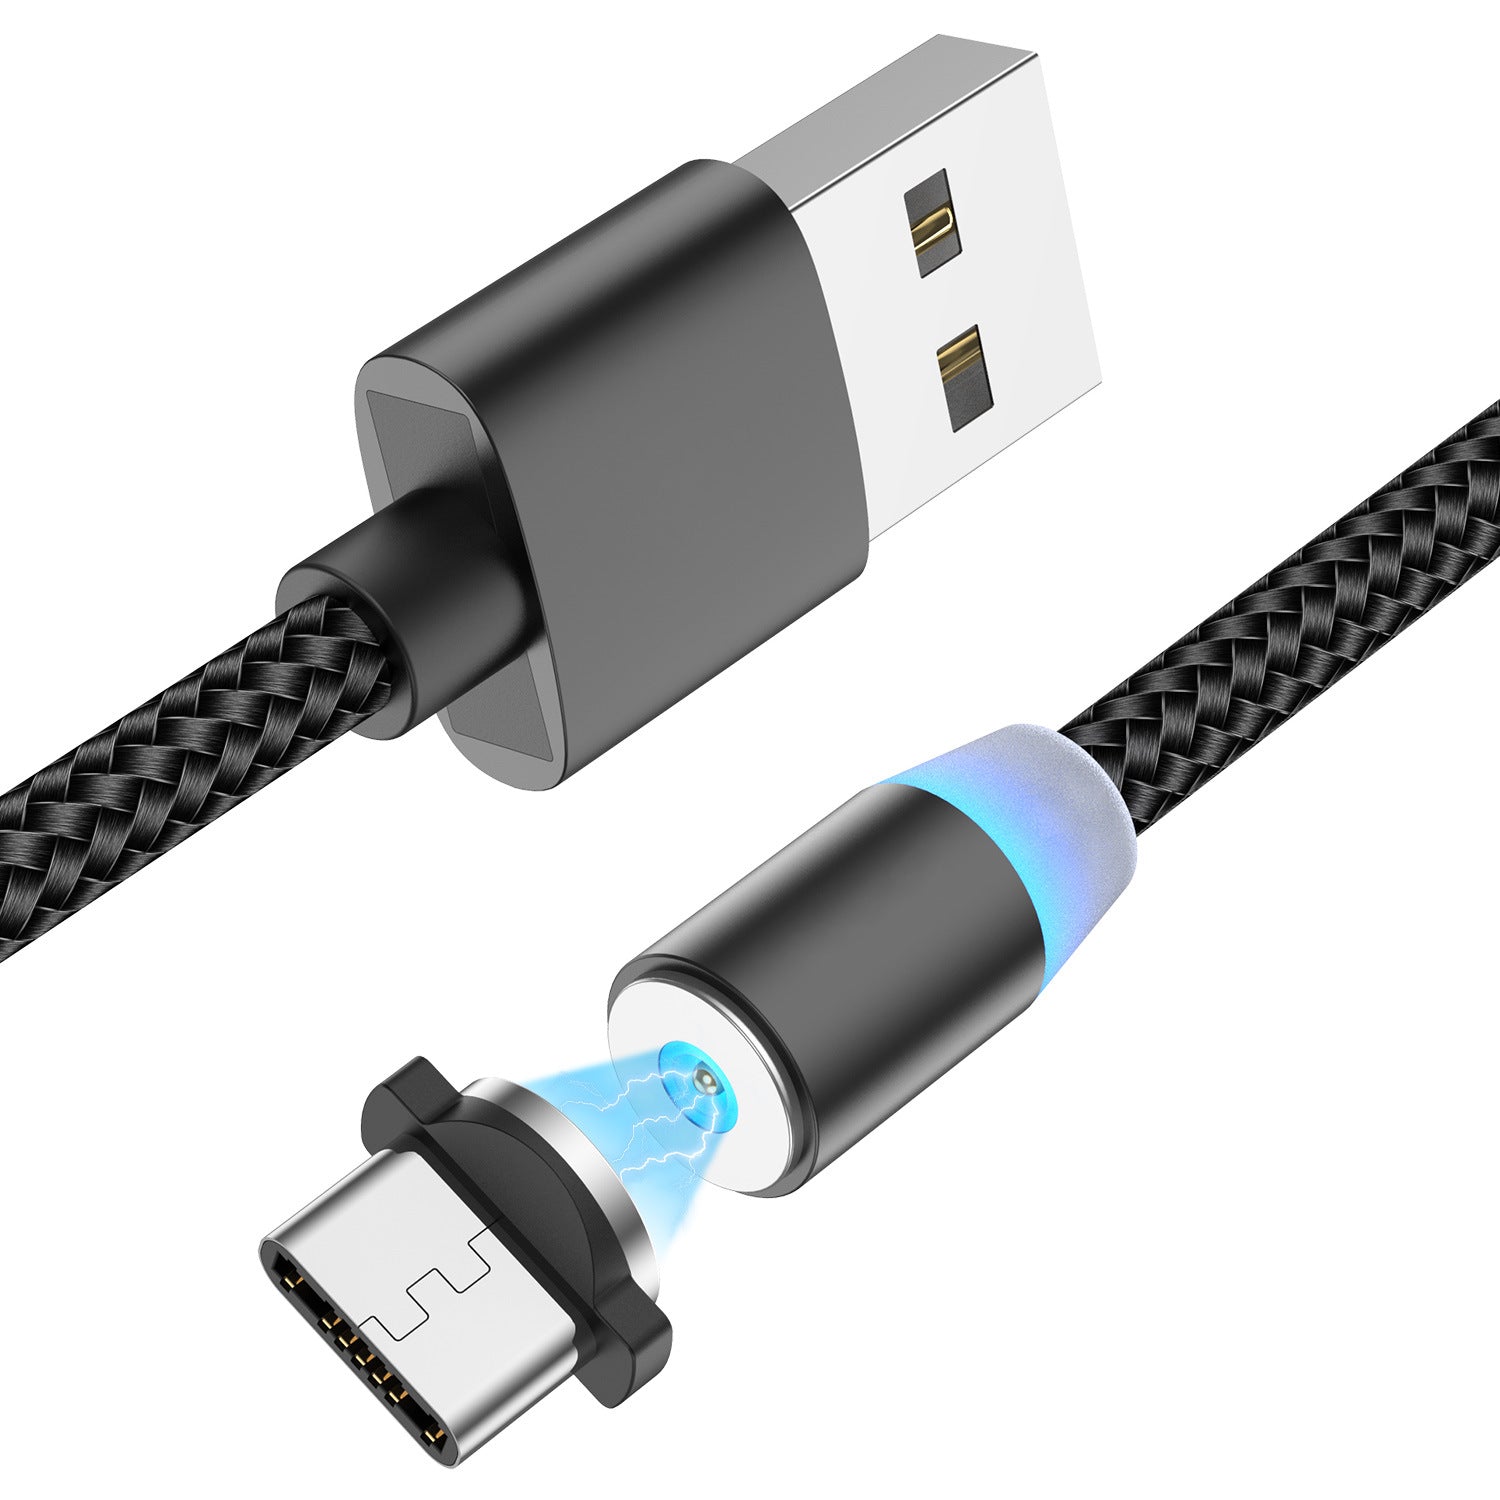 SuctionSync™ - 3 in 1 Magnetic Suction Charging cable